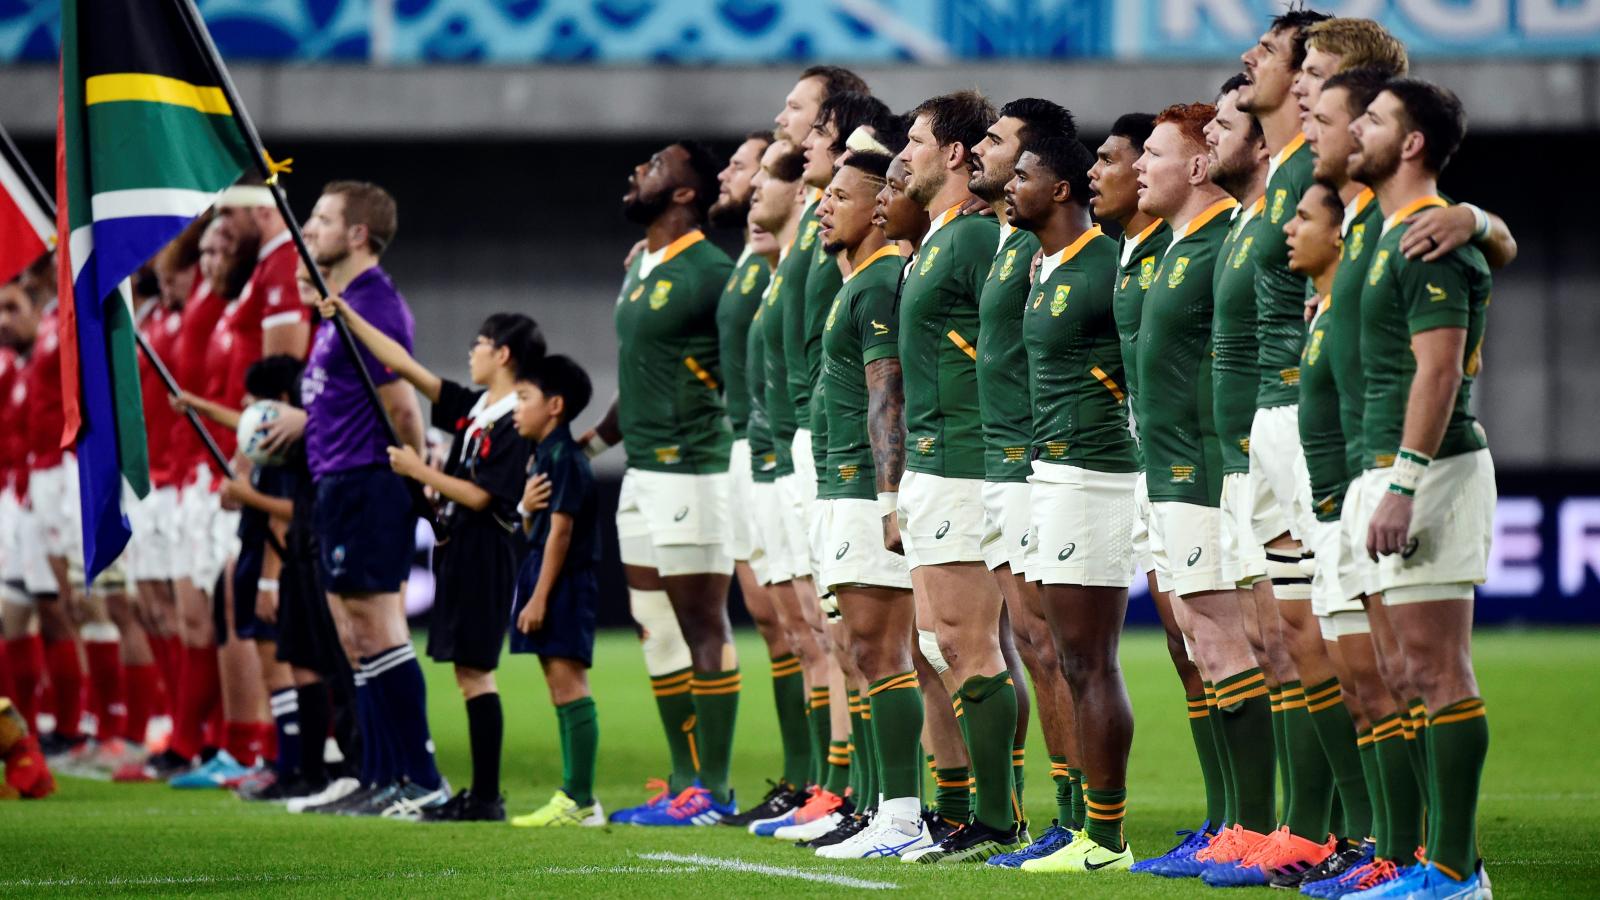 Rugby World cup reminds South Africa it's still divided on race